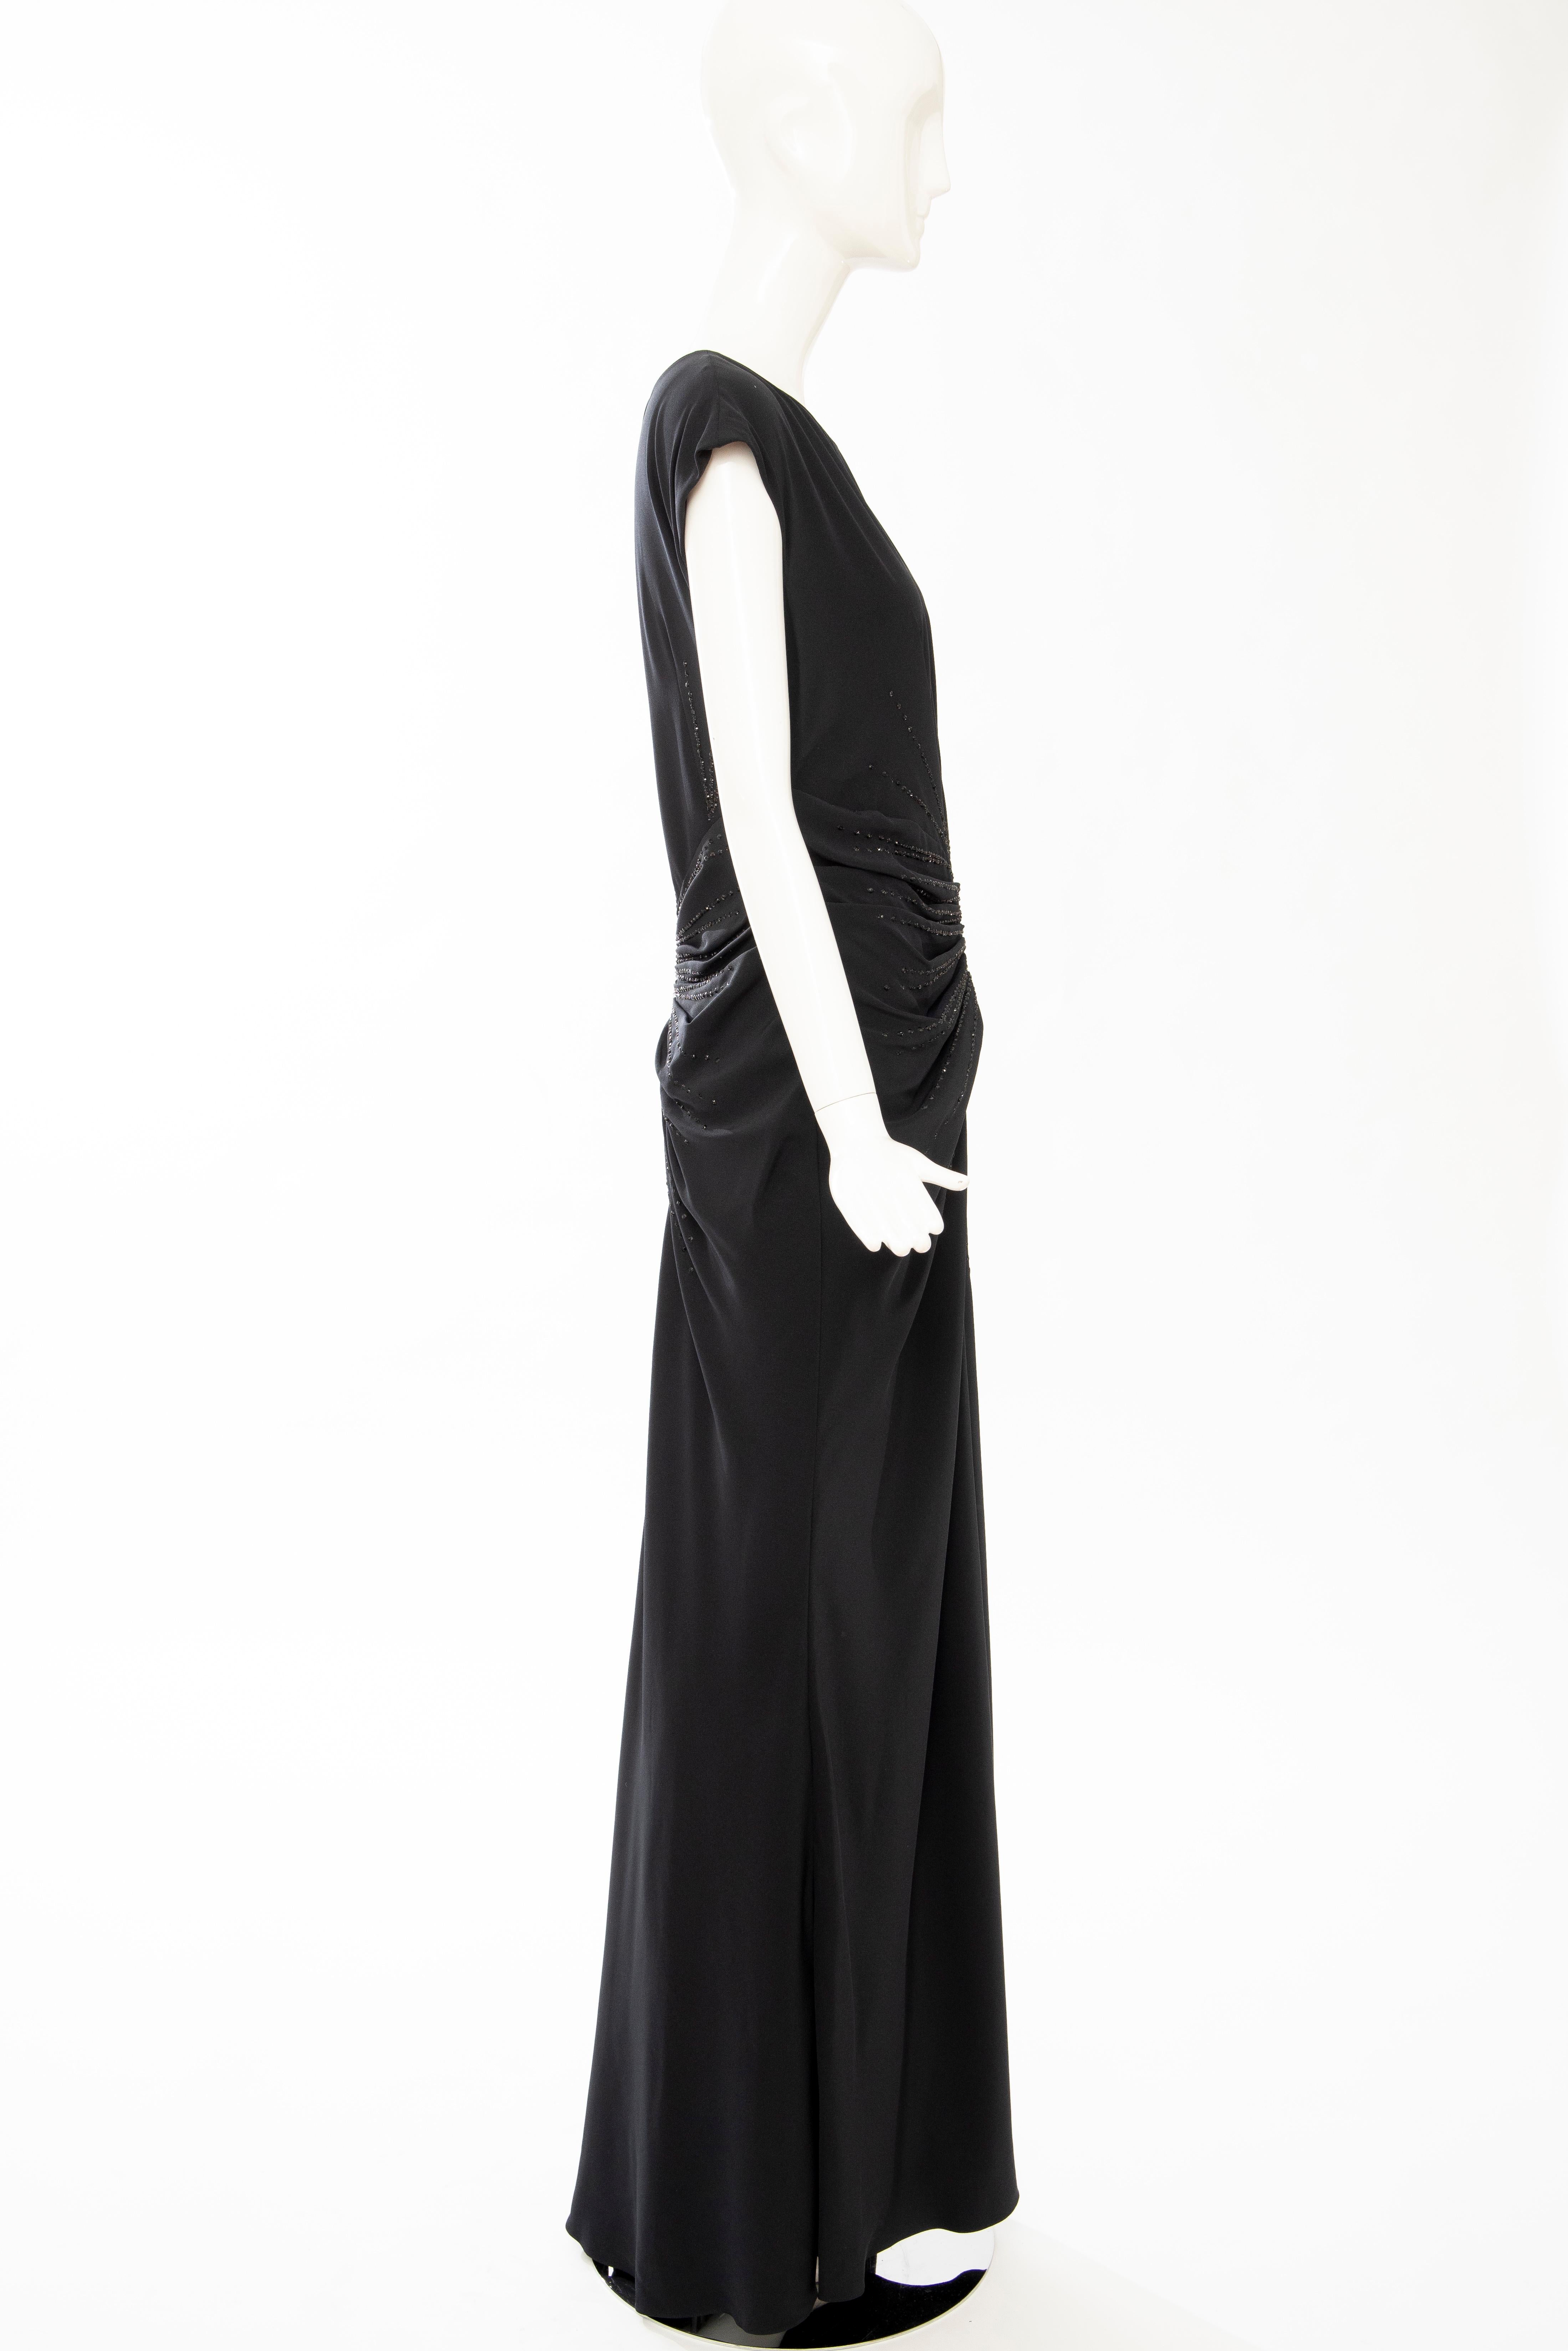 John Galliano for Christian Dior Black Embroidered Evening Dress, Spring 2008 1